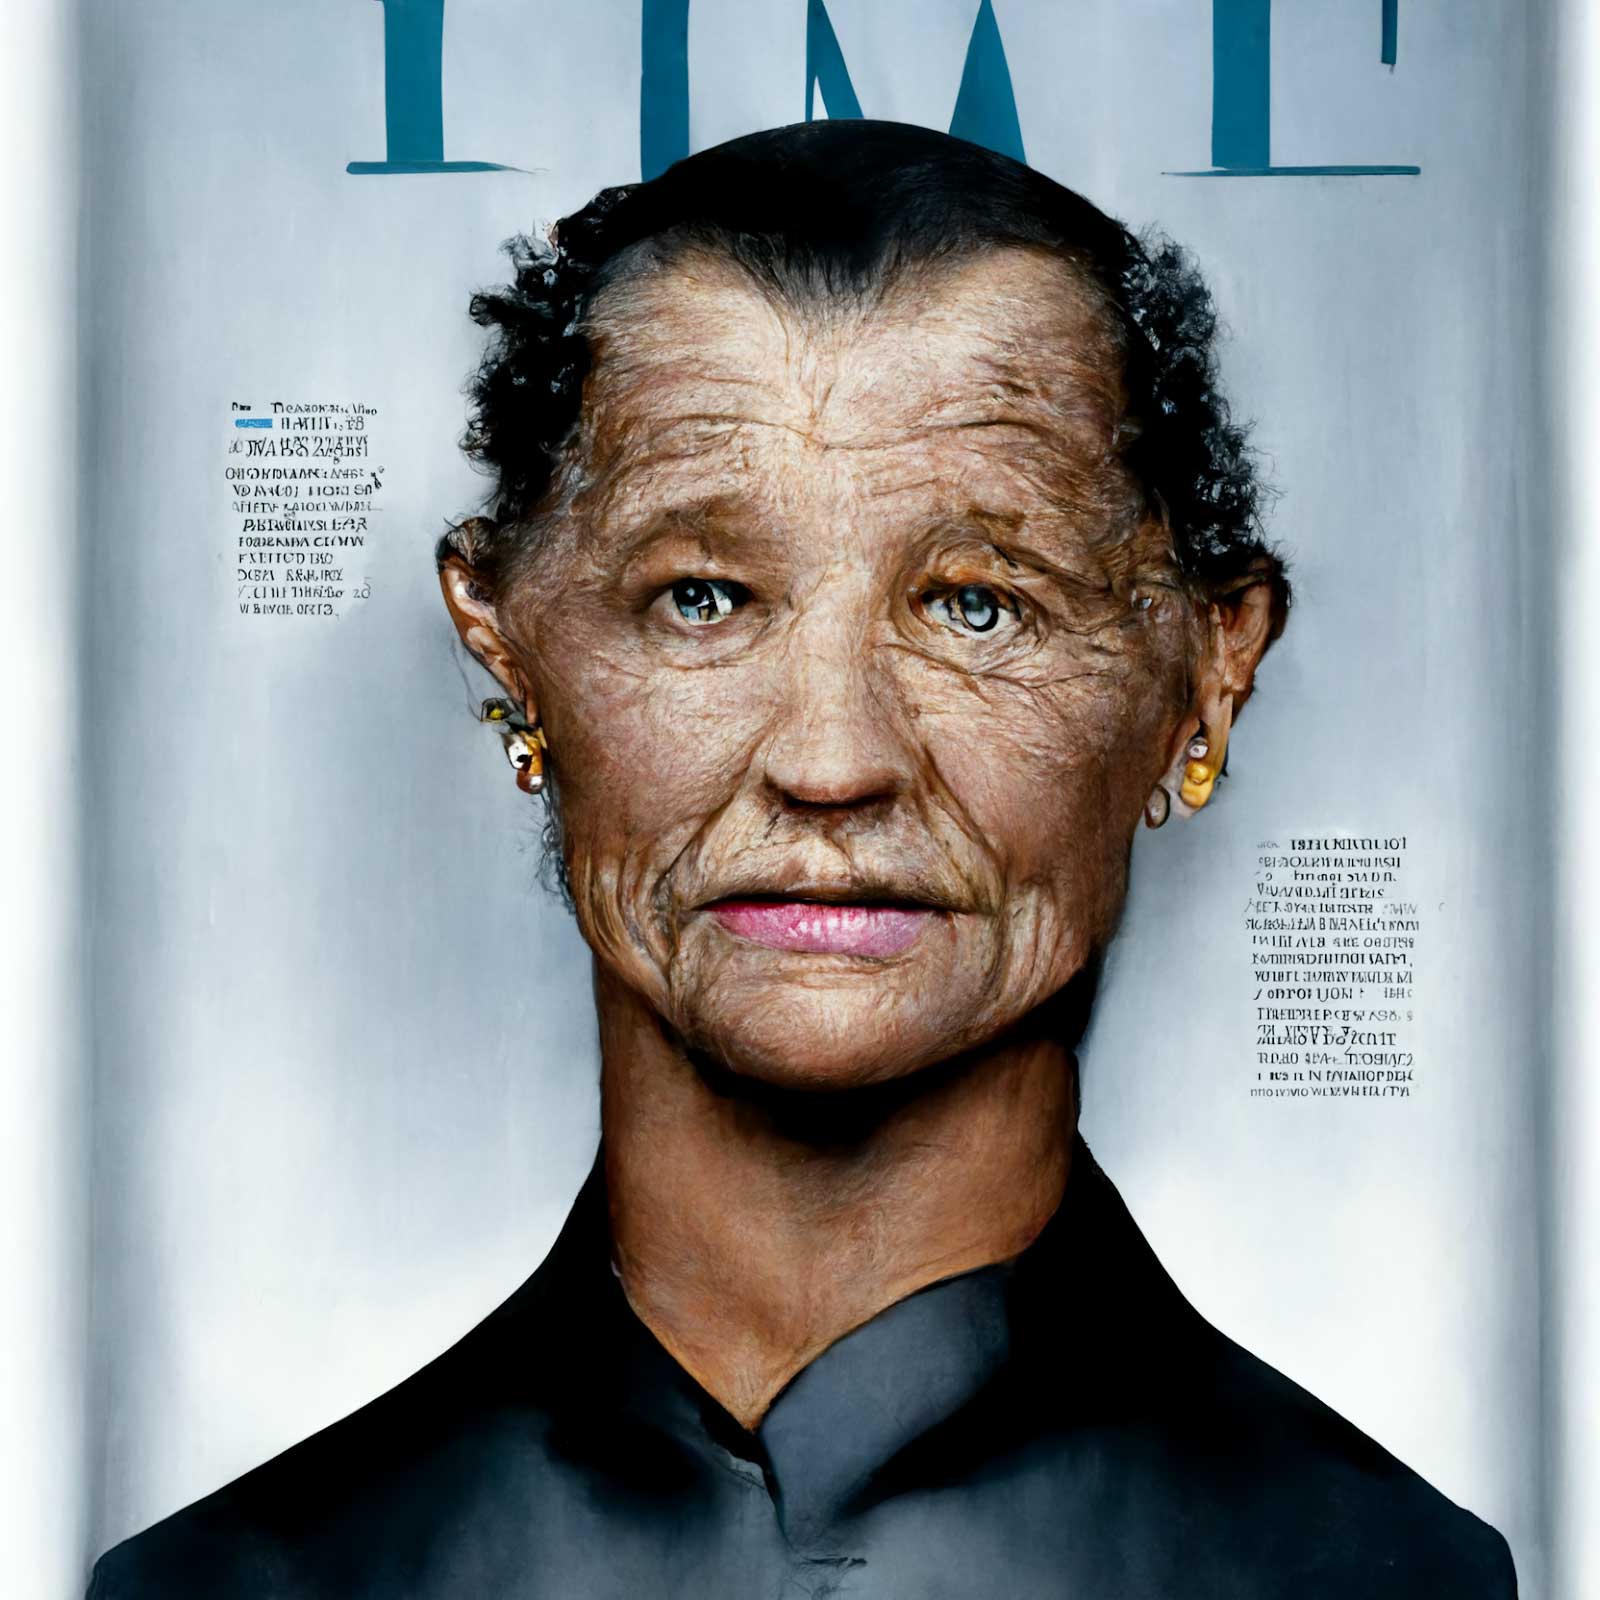 Time Magazine’s “2050 Person of the Year” Photo by Martin Schoeller. - Midjourney